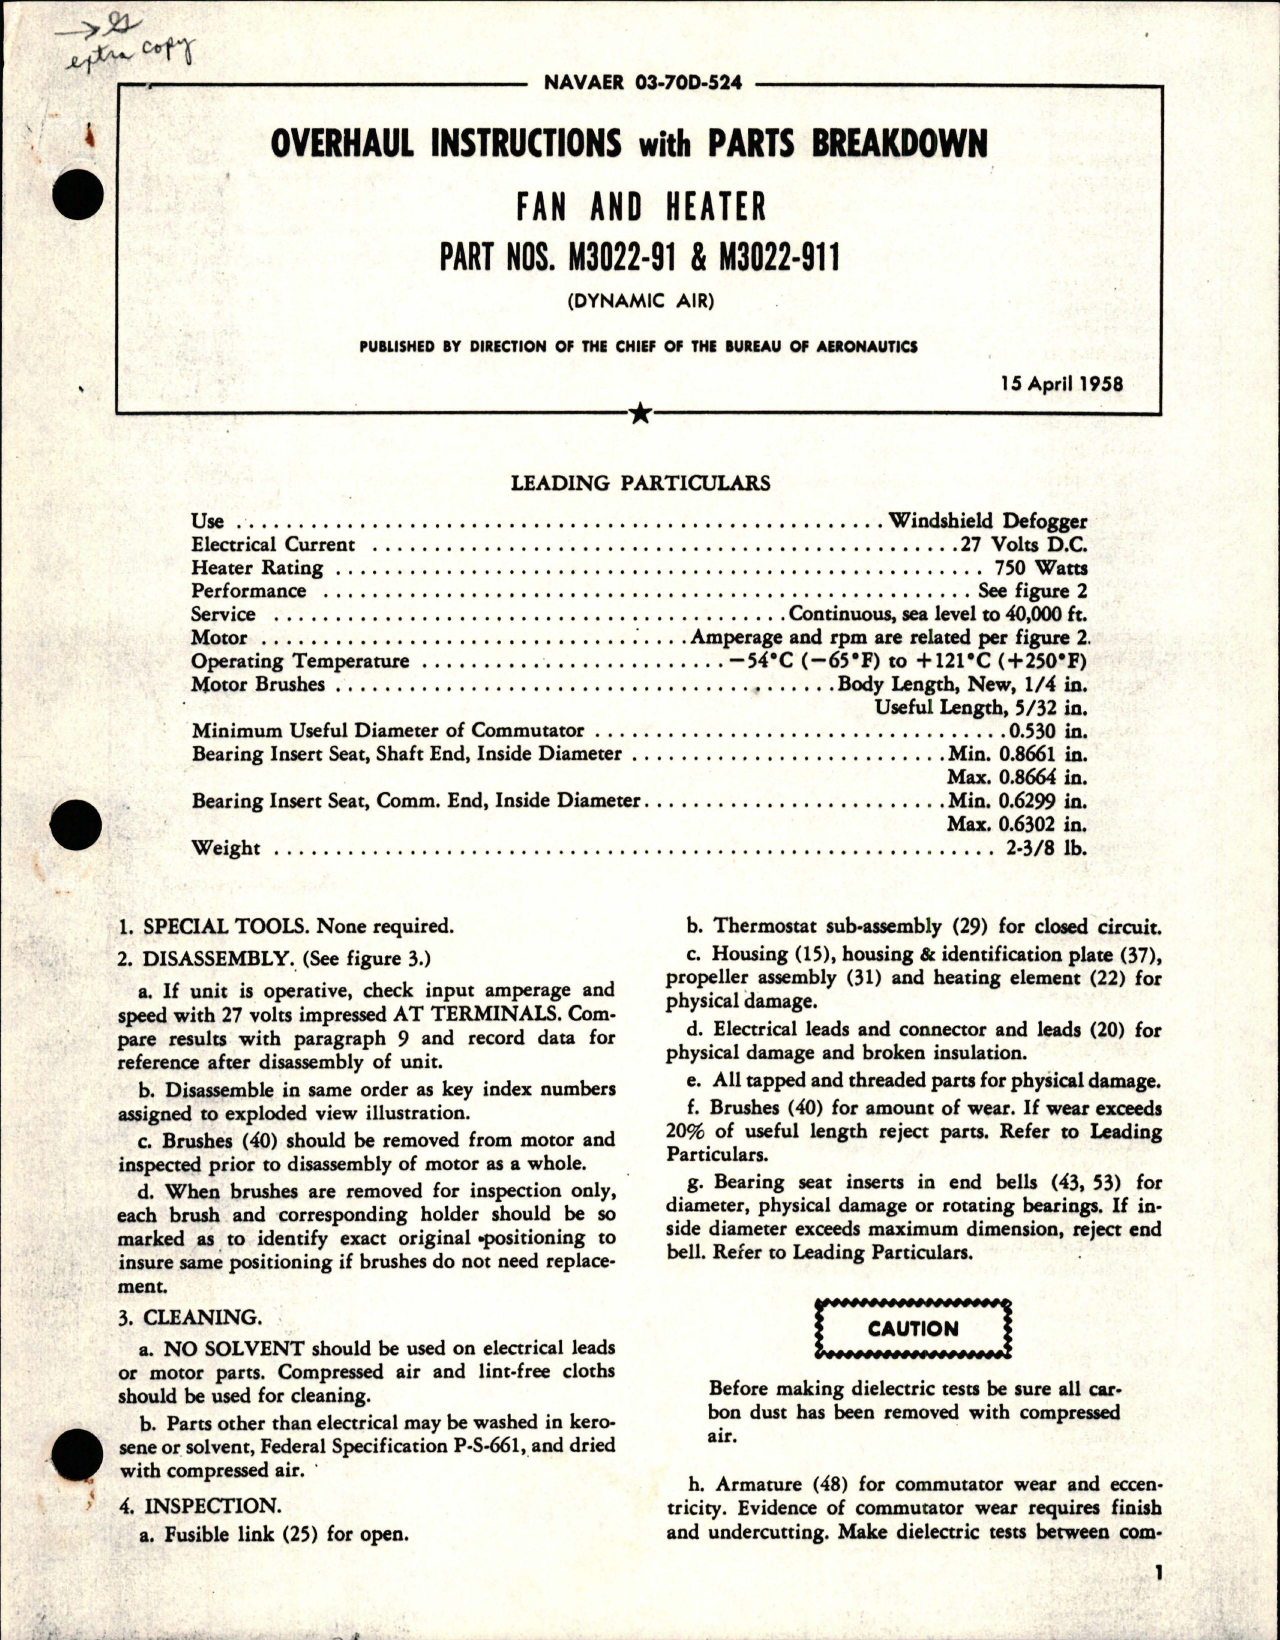 Sample page 1 from AirCorps Library document: Overhaul Instructions with Parts Breakdown for Fan and Heater - Parts M3022-91 and M3022-911